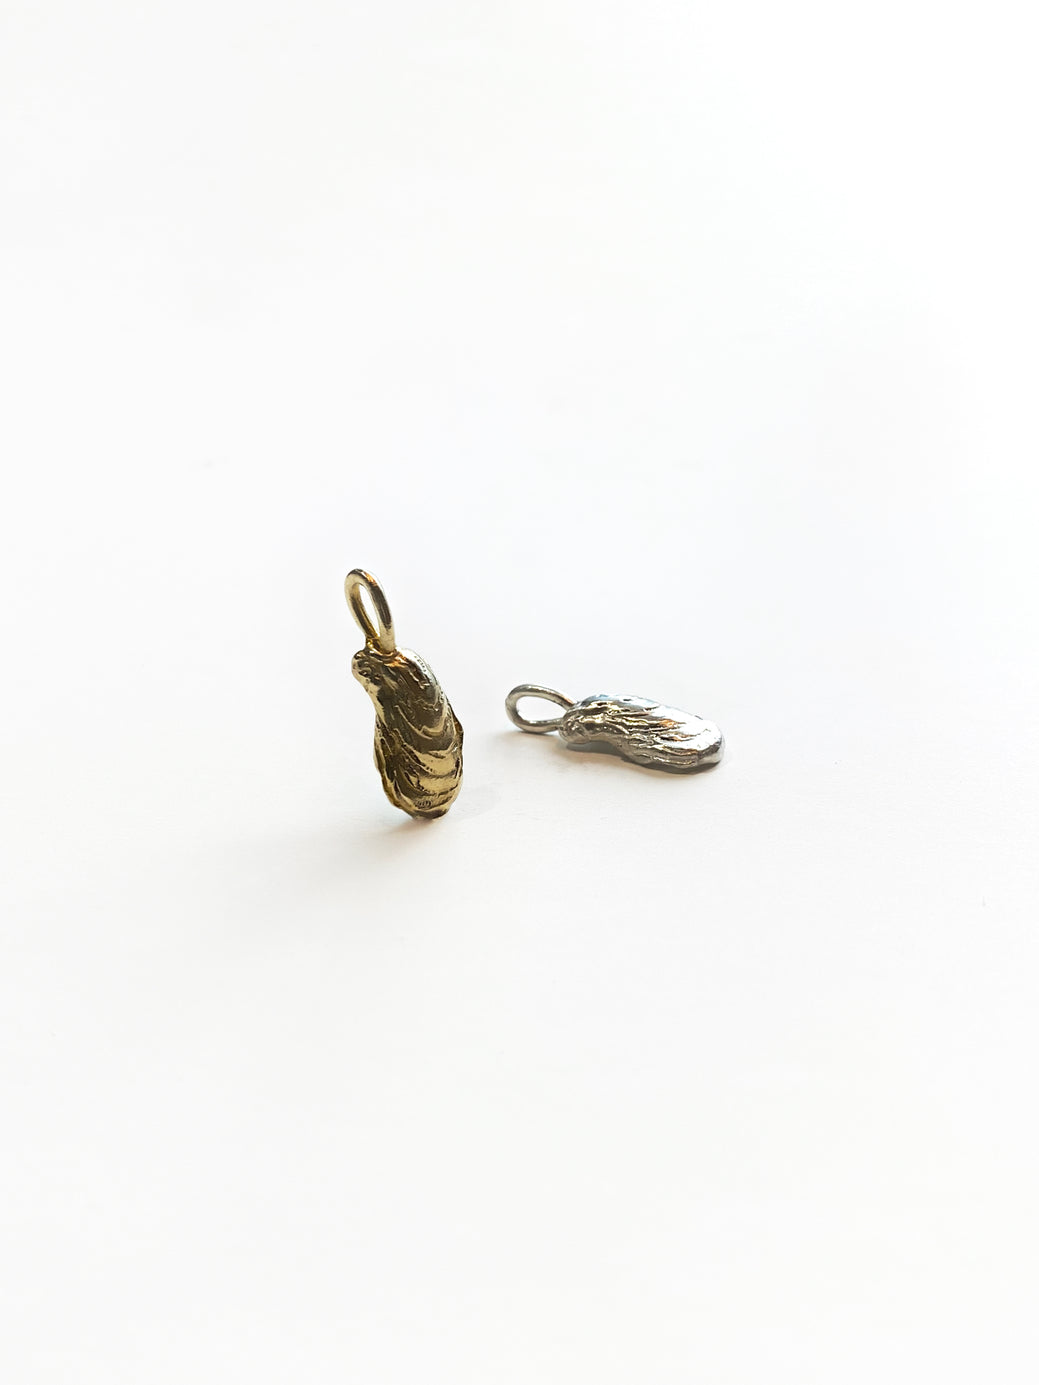 Gold and silver oyster charms on white background